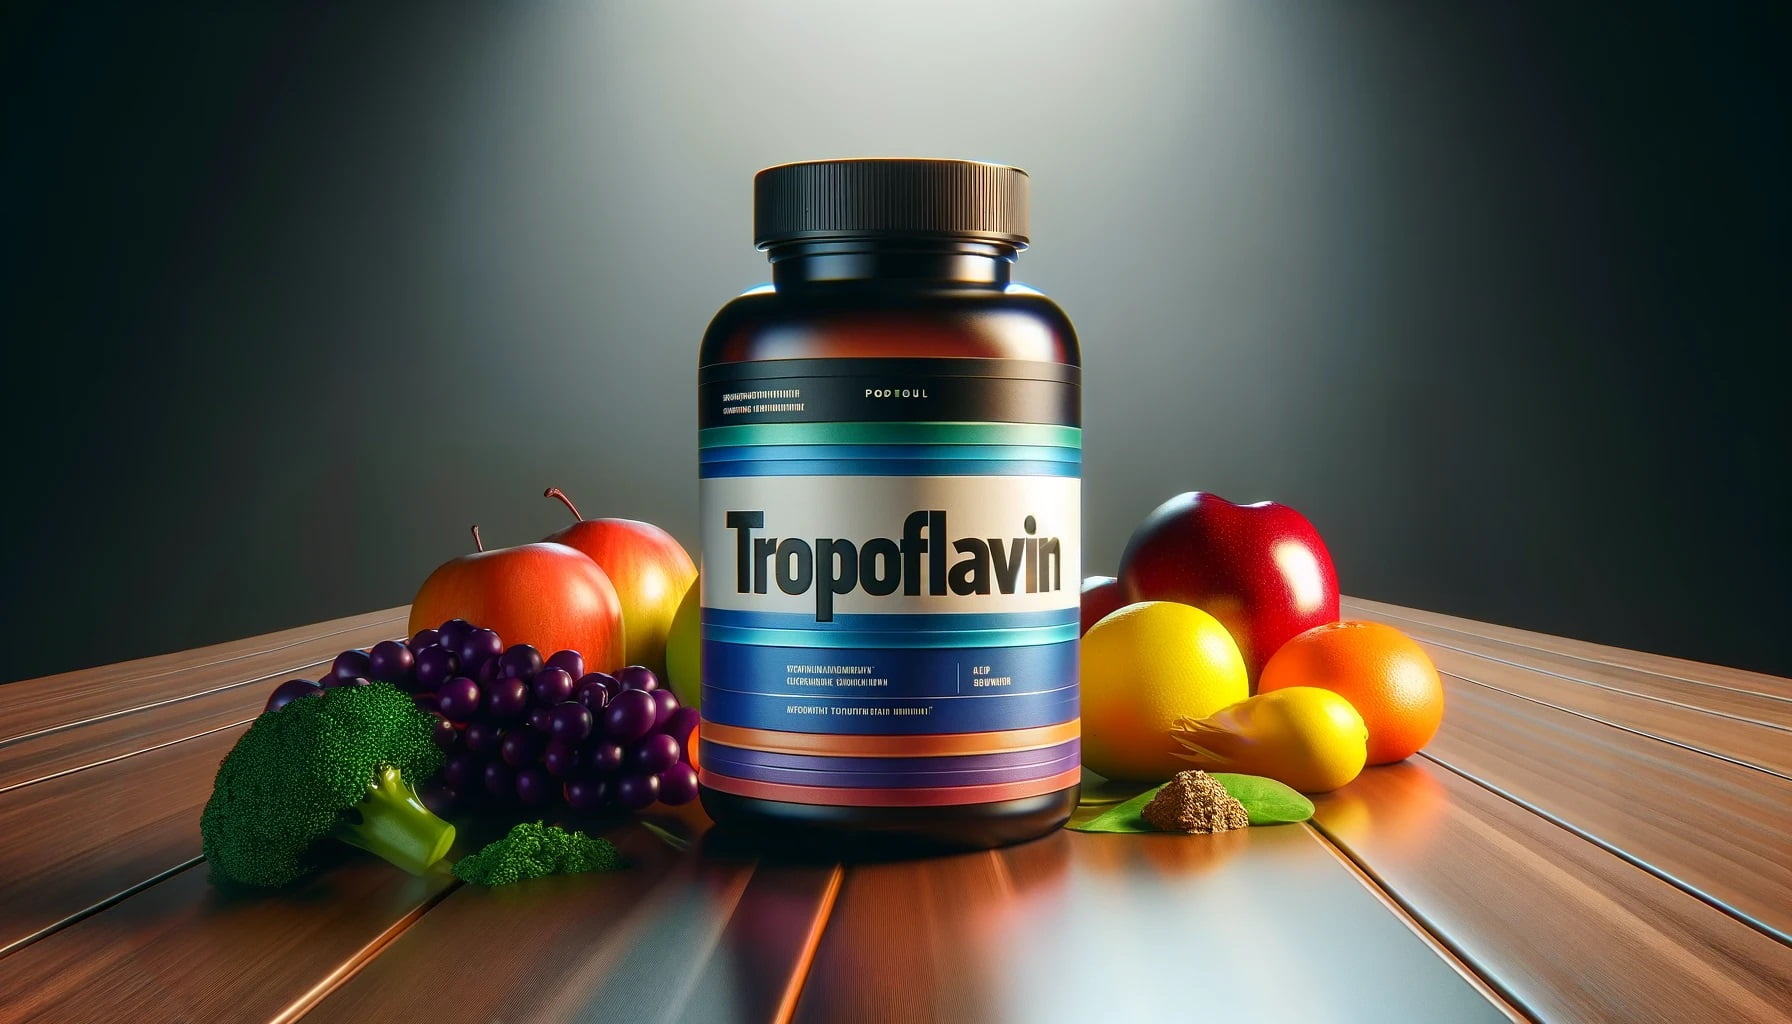 tropoflavin supplement with its natural sources